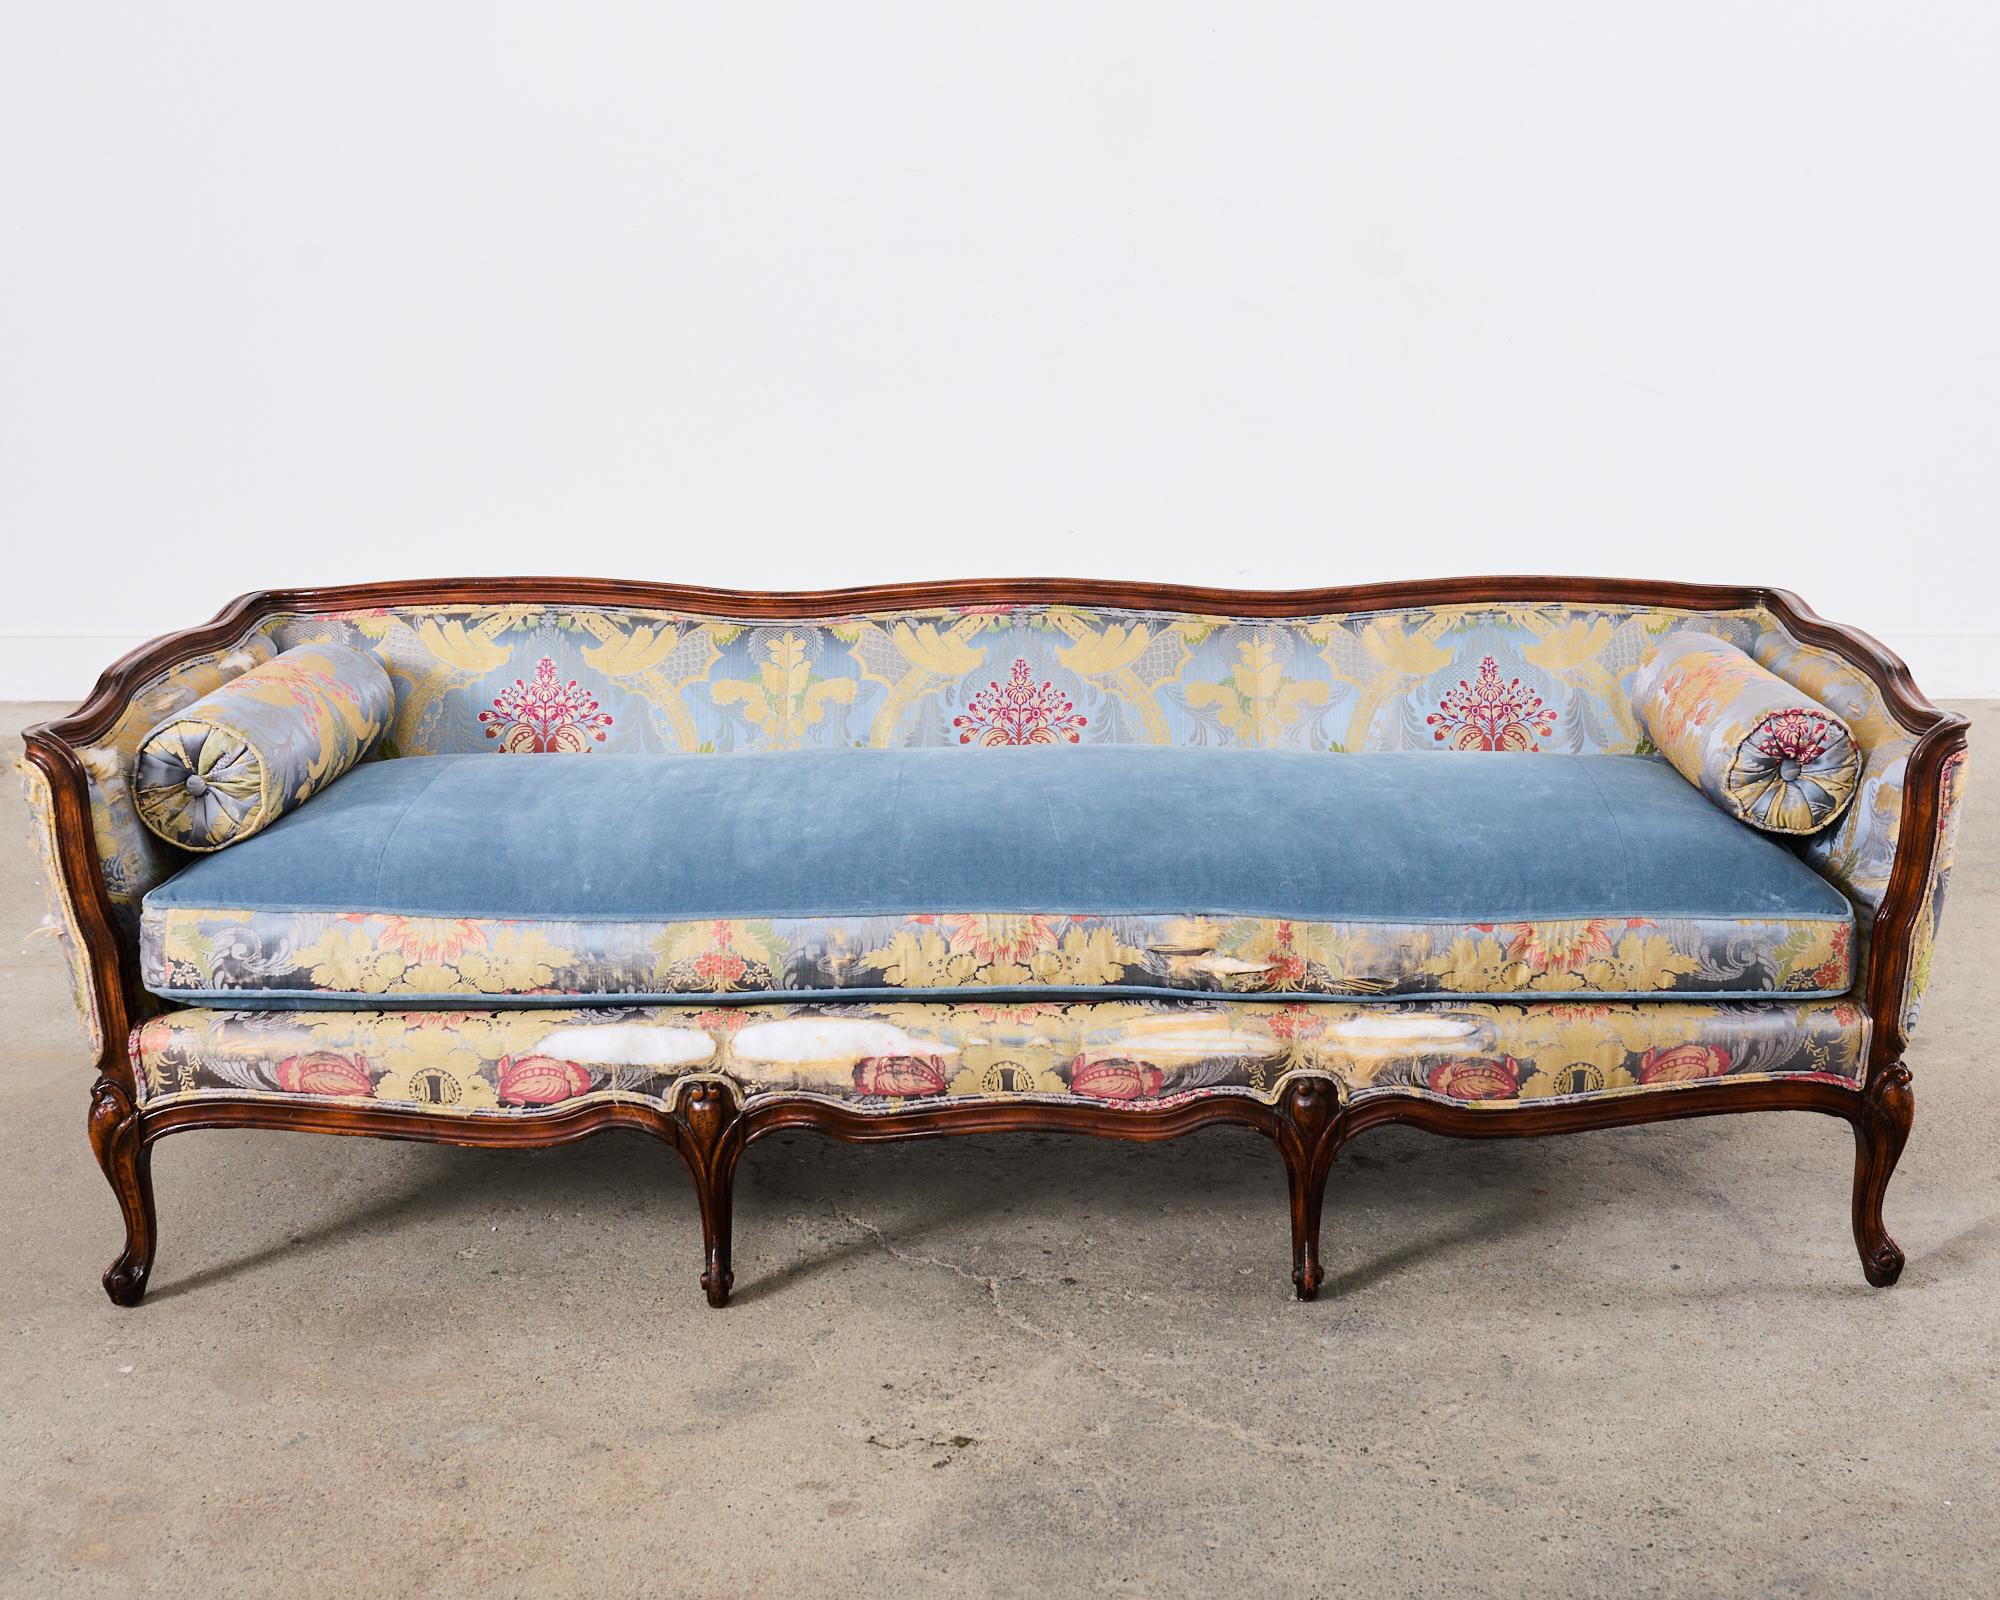 Fabric French Provincial Louis XV Style Serpentine Canape Sofa Settee For Sale